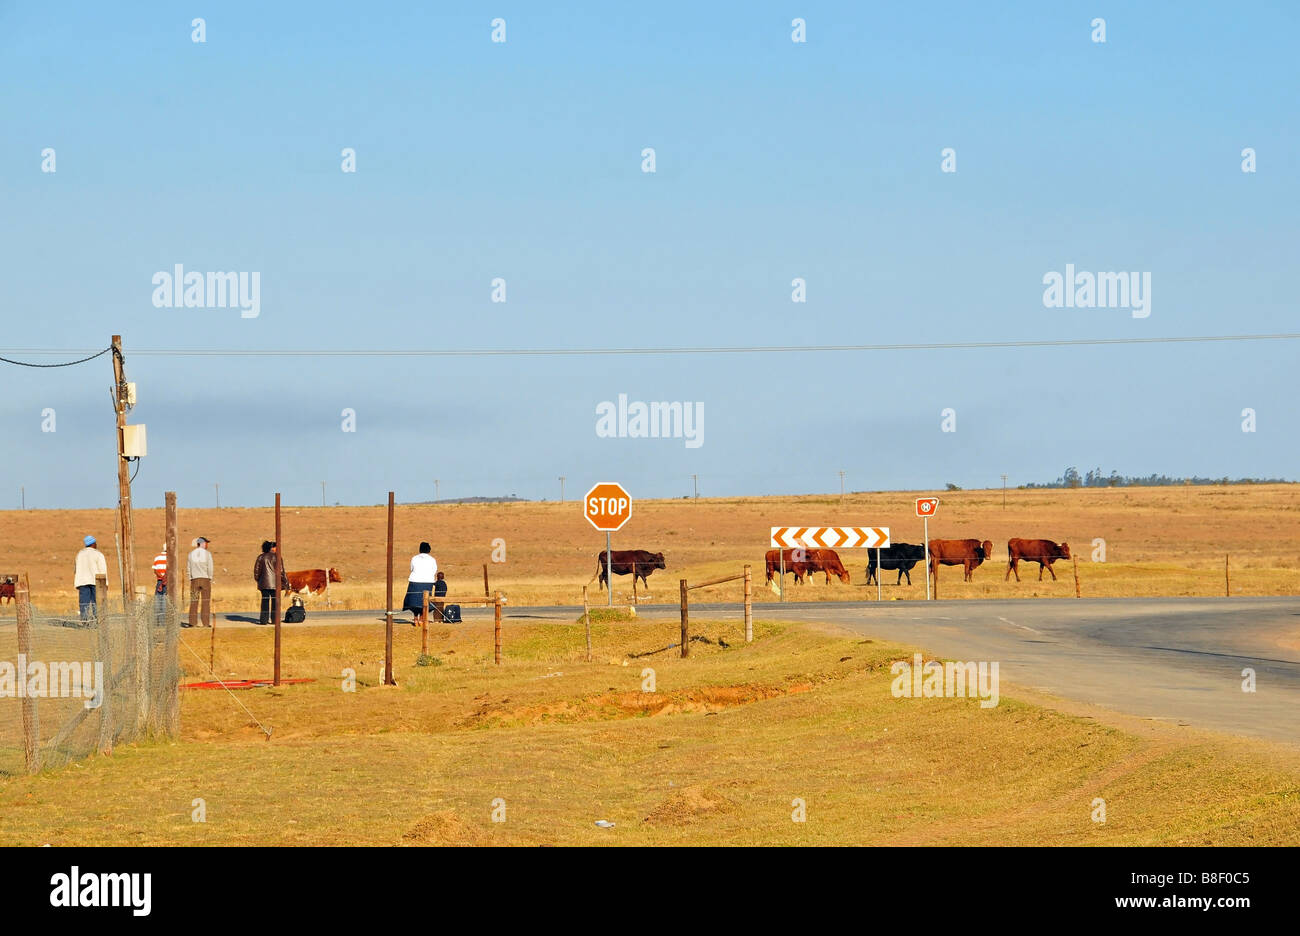 Six township residents wait for a minibus taxi along a road crossing open land at the eastern edge of Grahamstown, South Africa Stock Photo